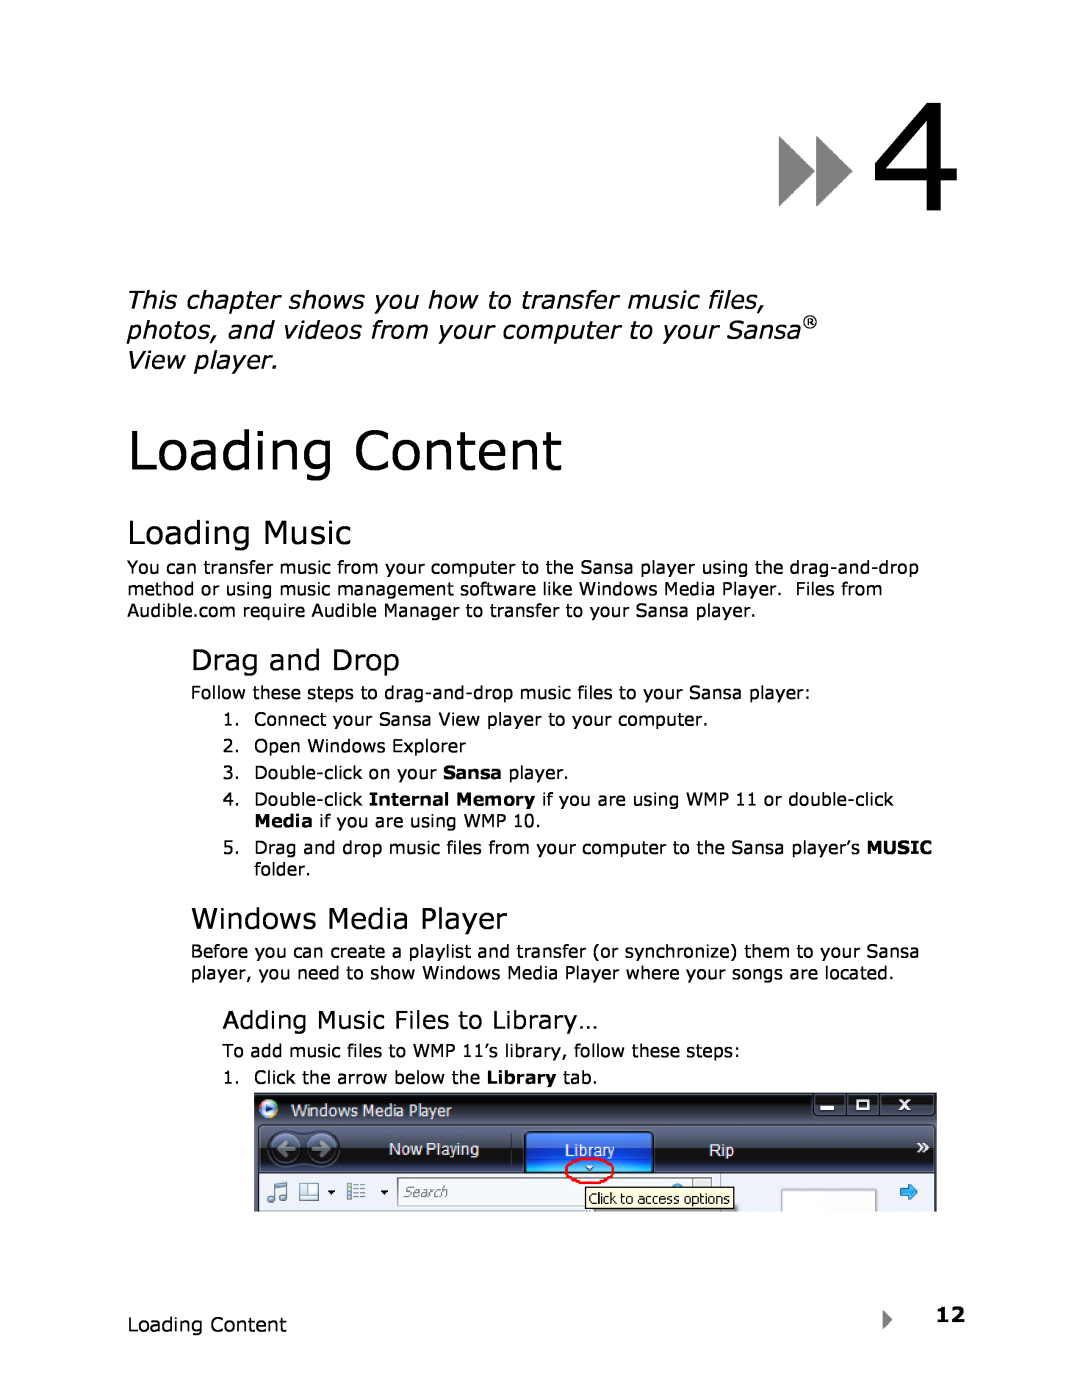 SanDisk View user manual Loading Content, Loading Music, Drag and Drop, Windows Media Player 